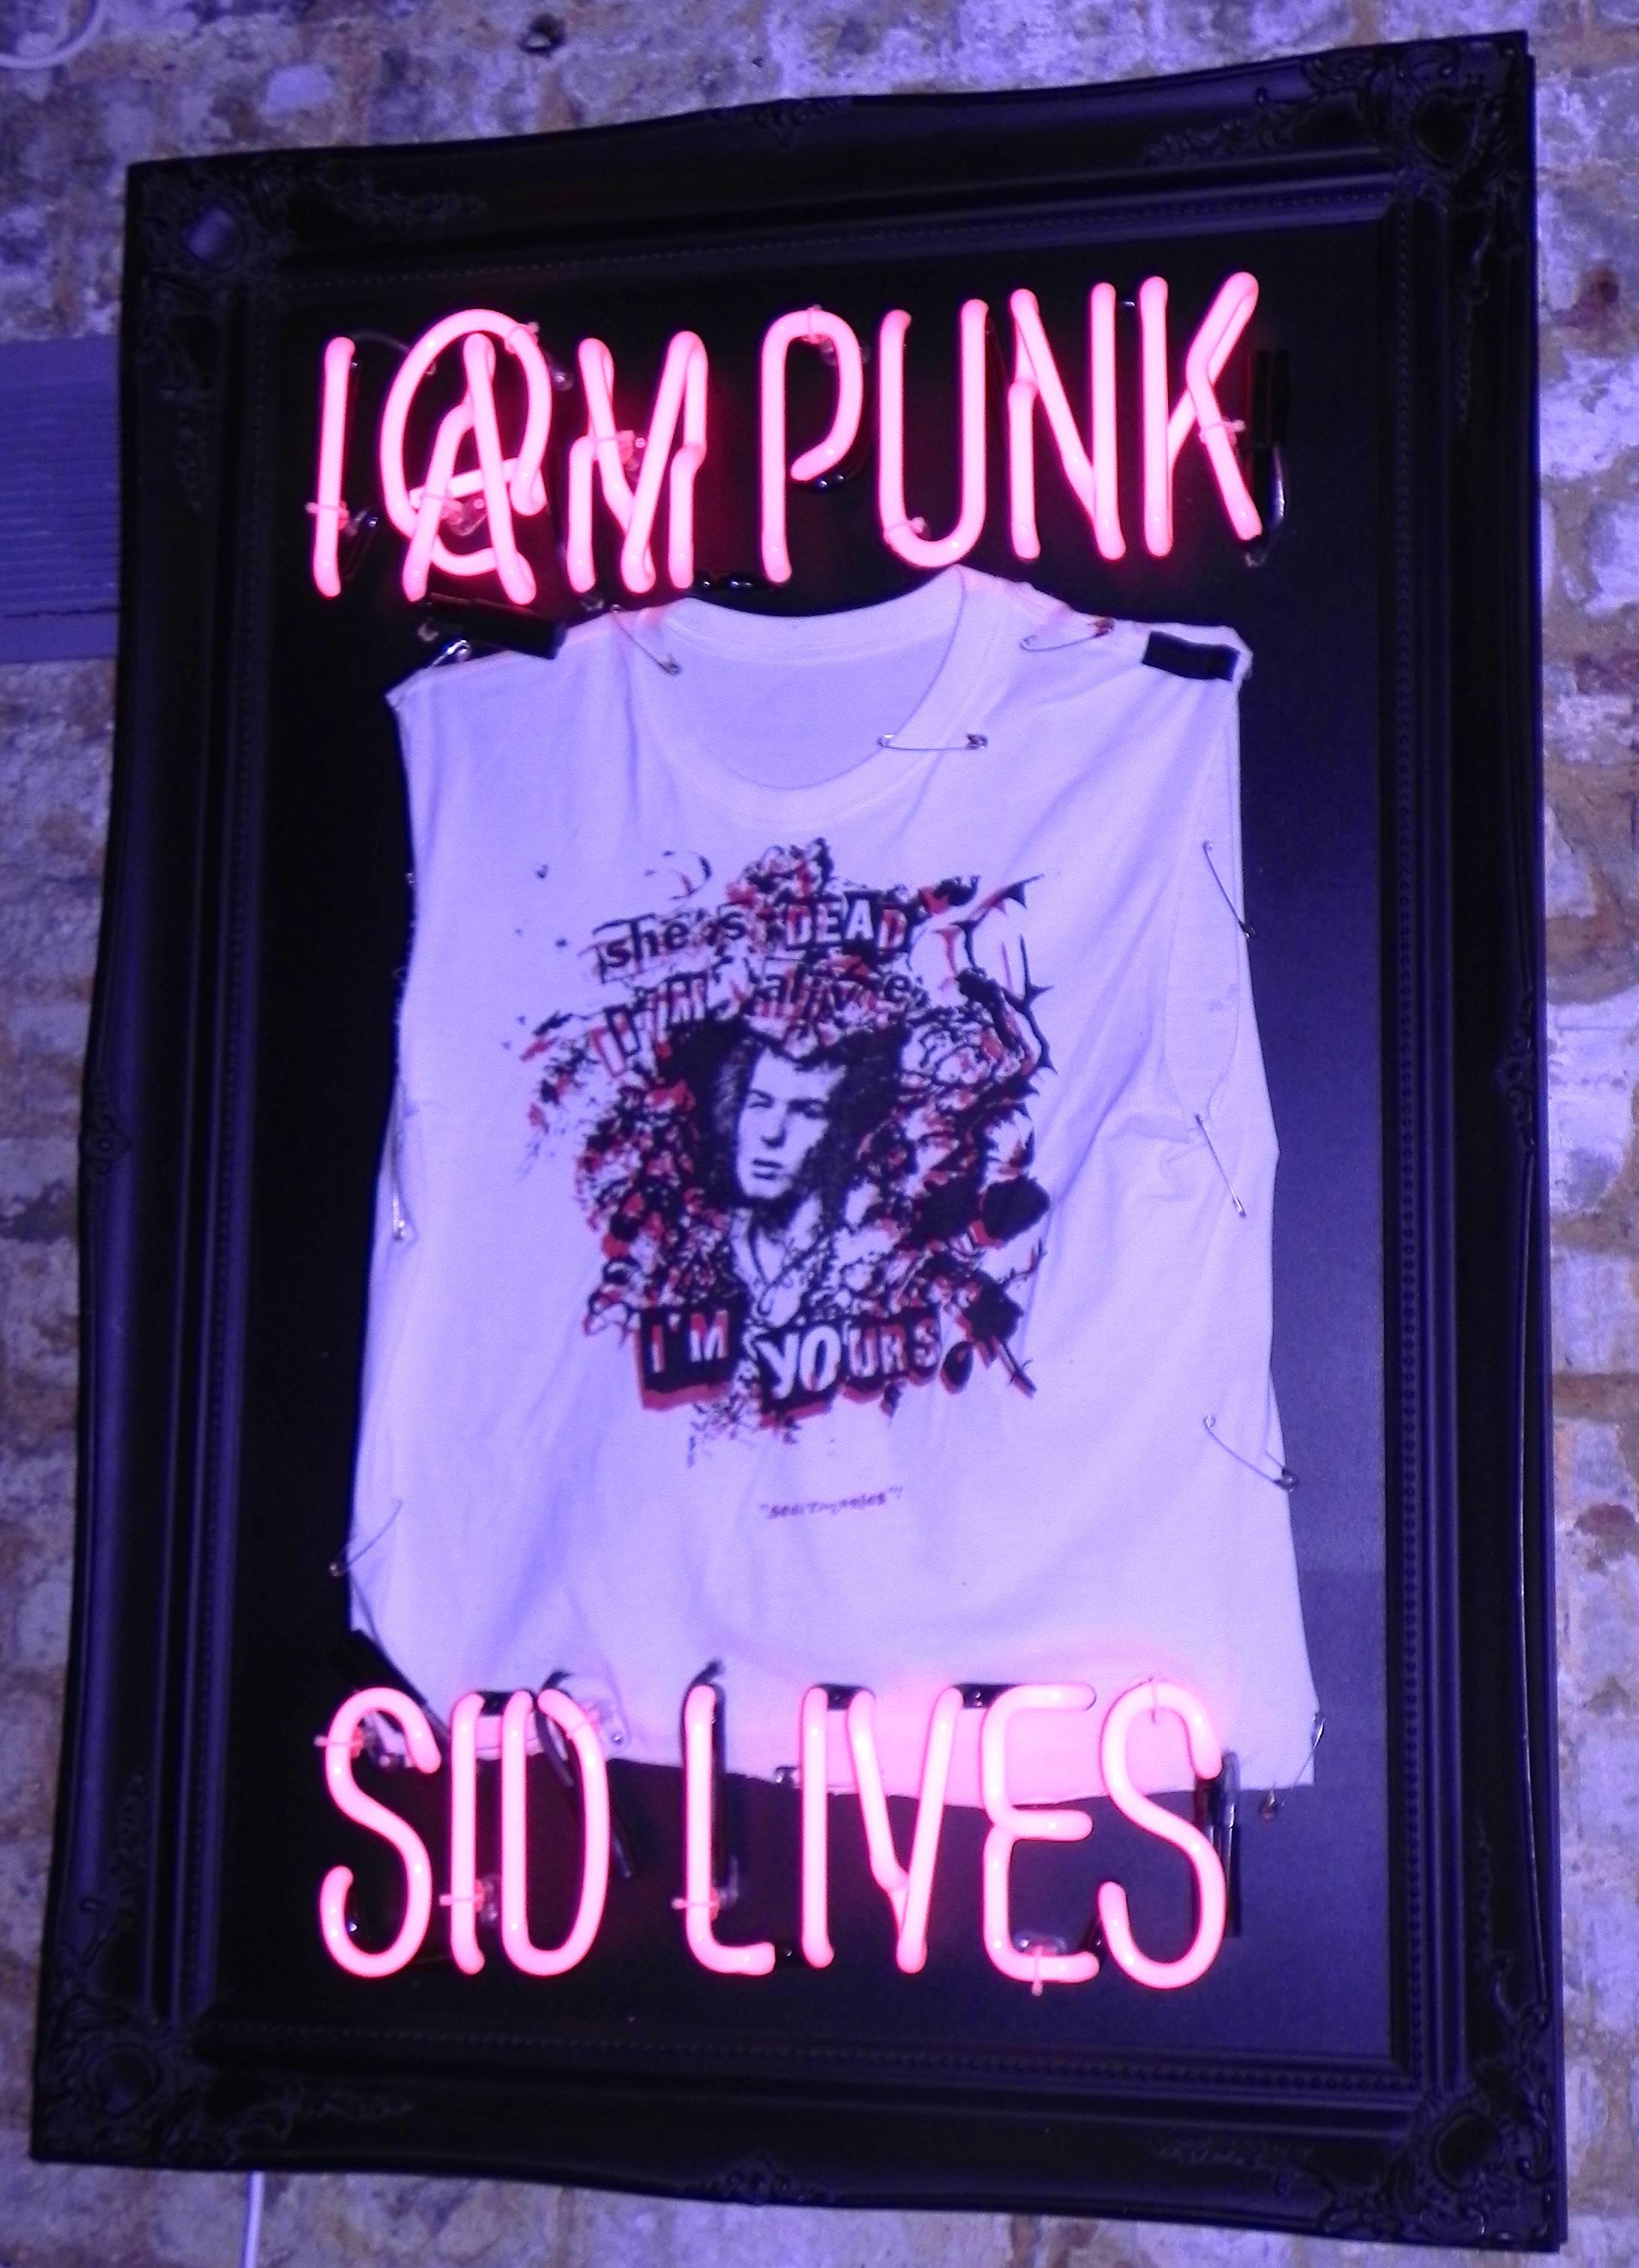 SID LIVES
illuminati neon
Original sex pistols T-shirt in Baroque frame with pink neon.
Measures: 106 x 79 x 12 cm.
£4000.

Inspired by the cultural vibes embedded in London, illuminati neon creates beautiful neon pieces with a hint of punk